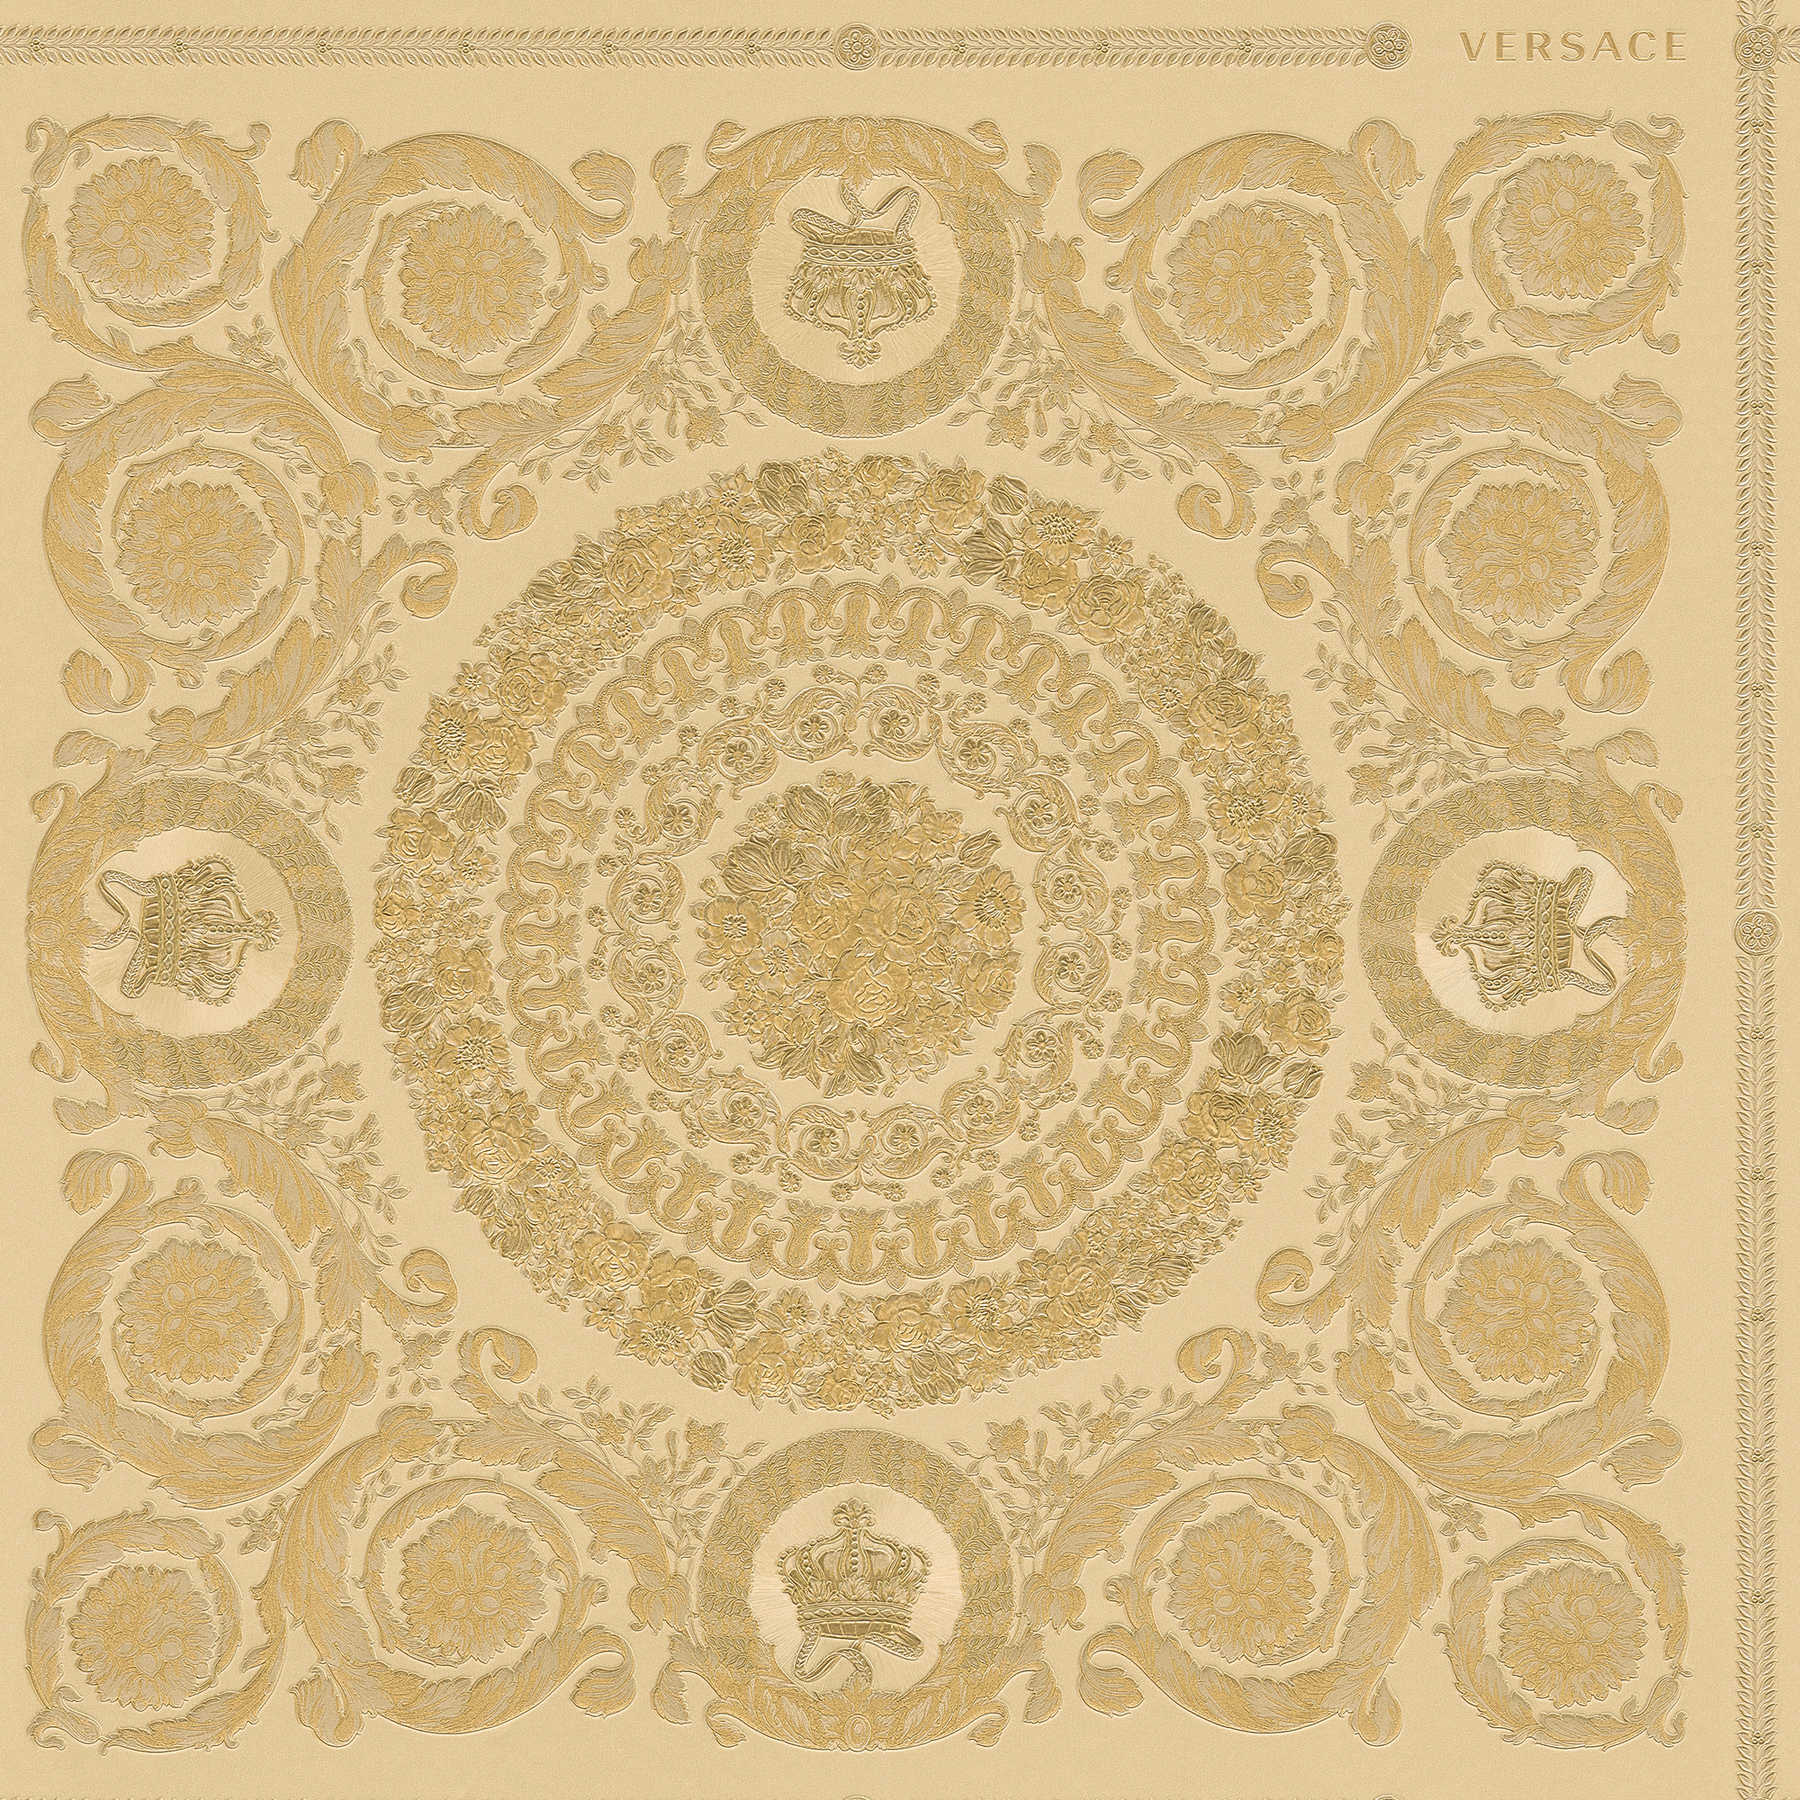         Luxury VERSACE Home wallpaper crowns & roses - gold
    